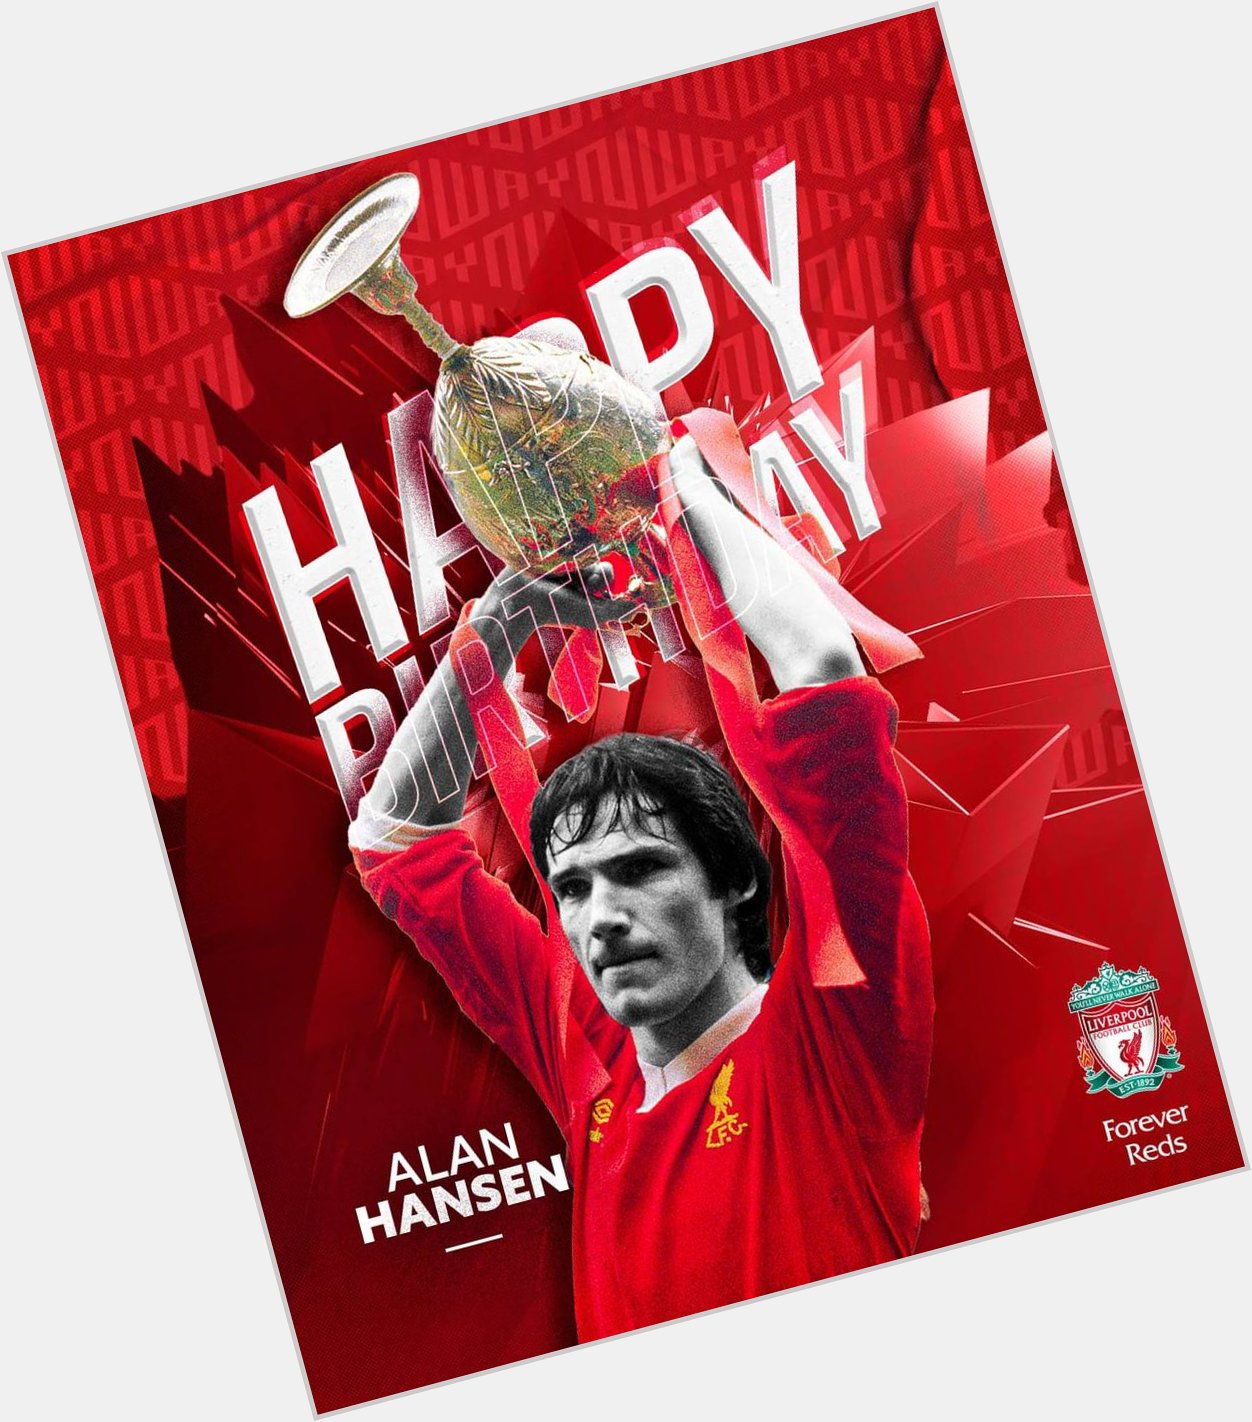 Over 6  0  0  appearances and 1  7  trophies for this Liverpool legend Happy birthday, Alan Hansen 